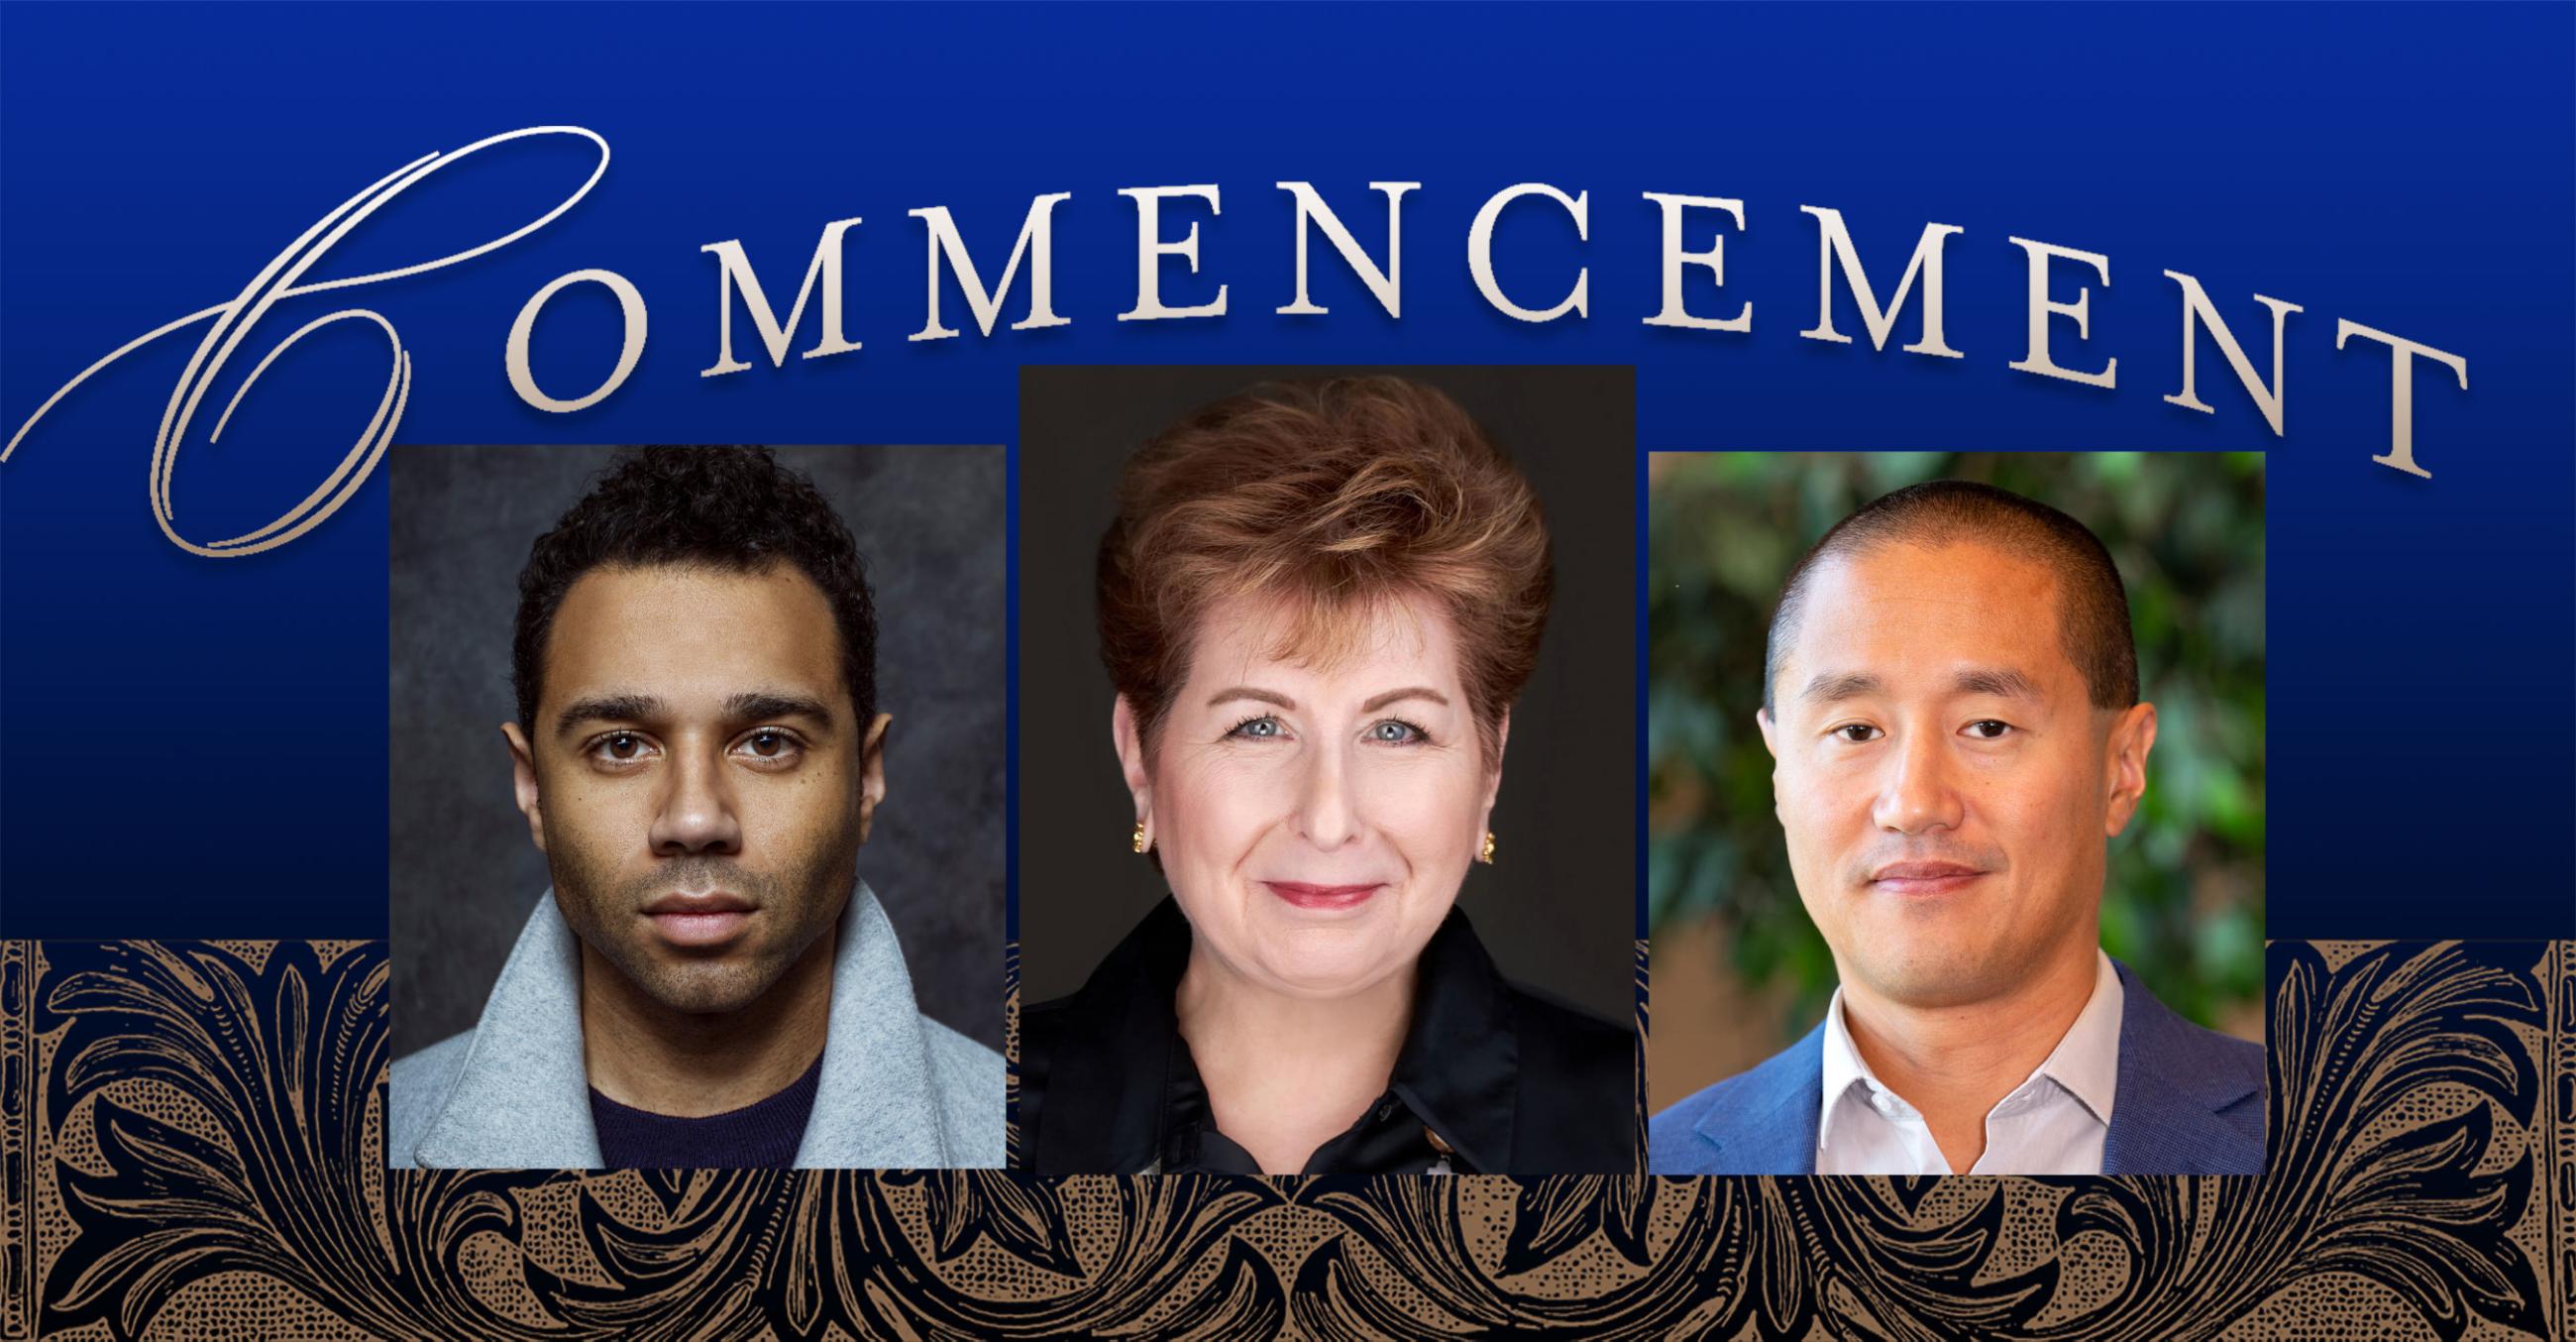 Left to right: actor and singer Corbin Bleu; Robin Kanarek, recipient of the Honorary Doctor of Humane Letters; and Ted Yang, member of the Connecticut Board of Regents for Higher Education